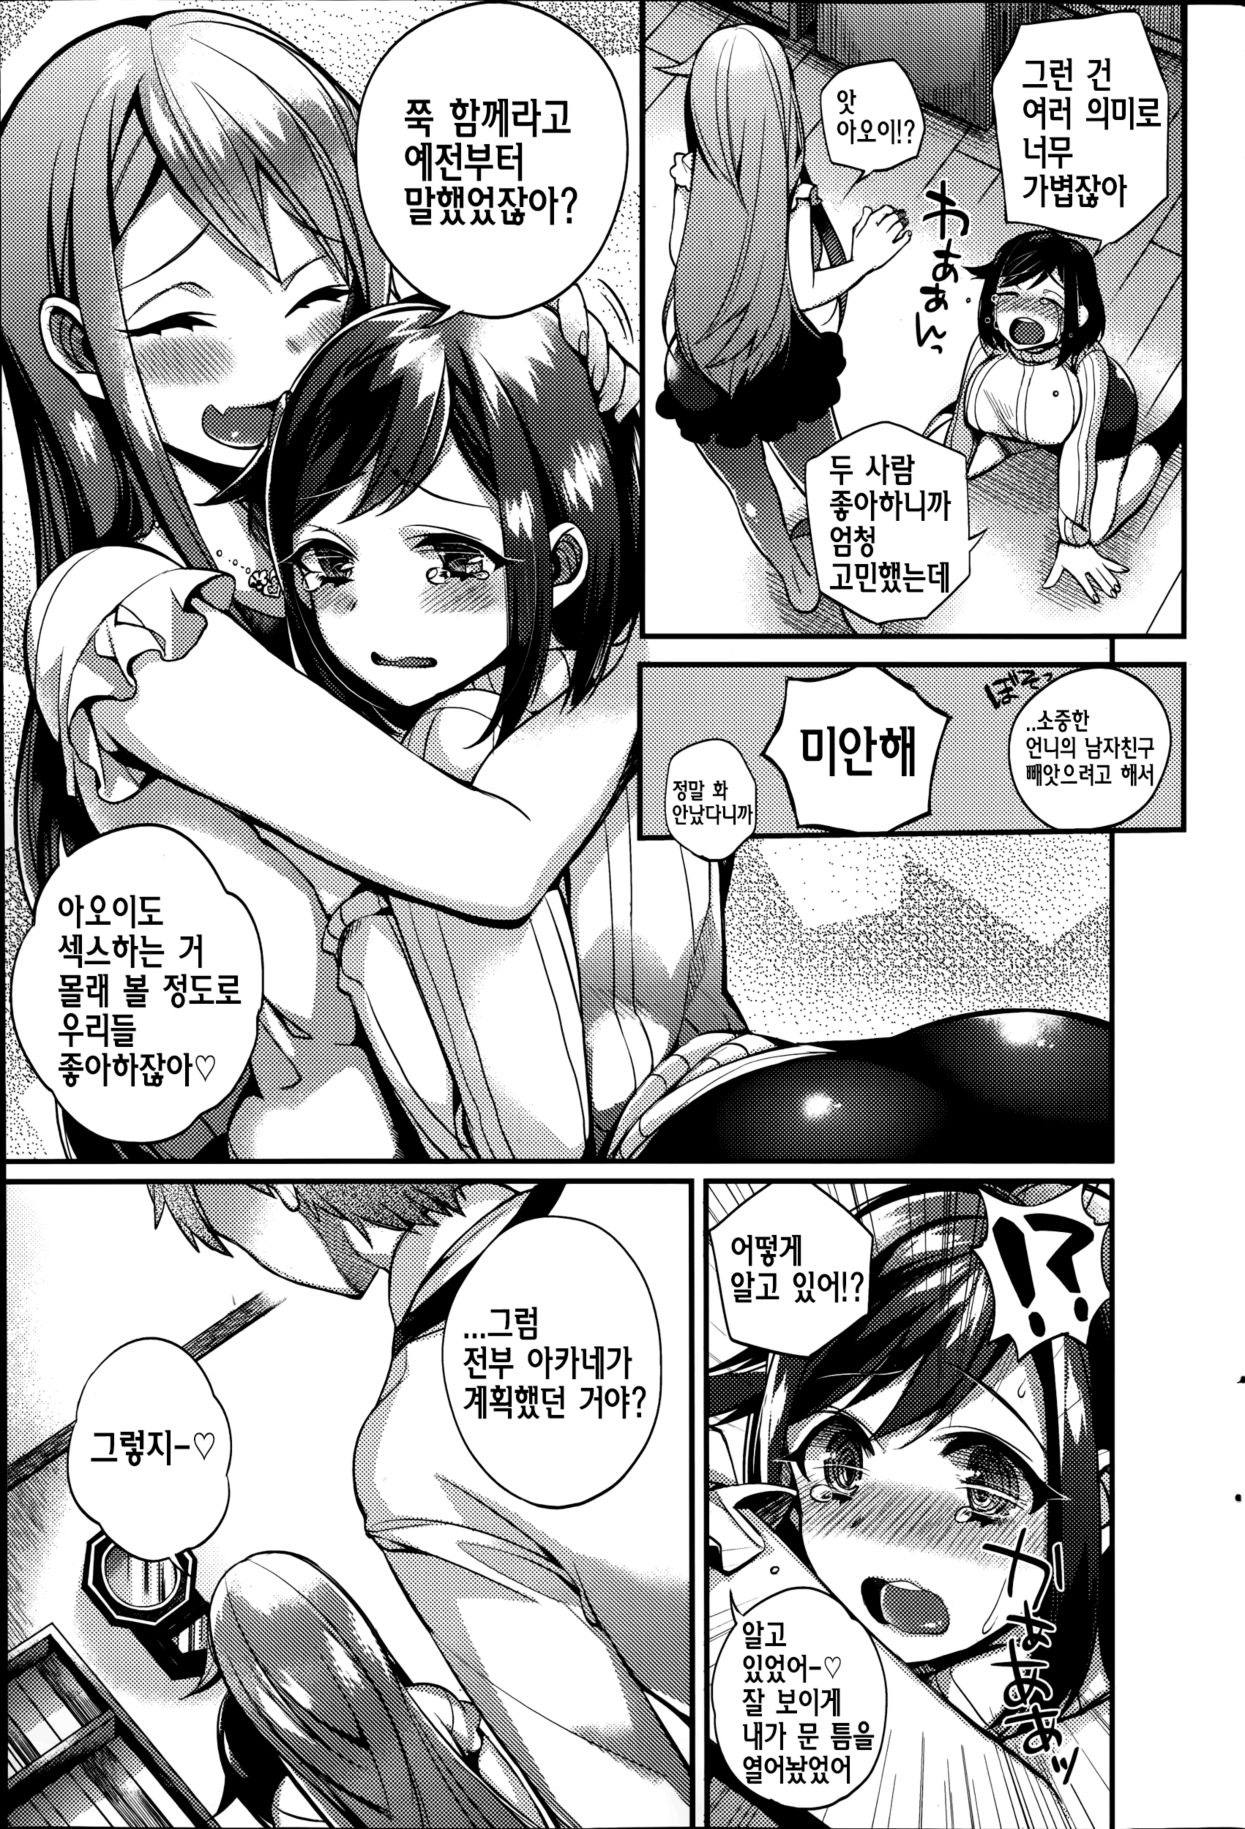 [Shindou] Sisters Conflict Ch.2 (Comic Hotmilk 2014-08) [Korean] {Regularpizza} [しんどう] Sisters Conflict 第2章 (コミックホットミルク 2014年8月号) [韓国翻訳]